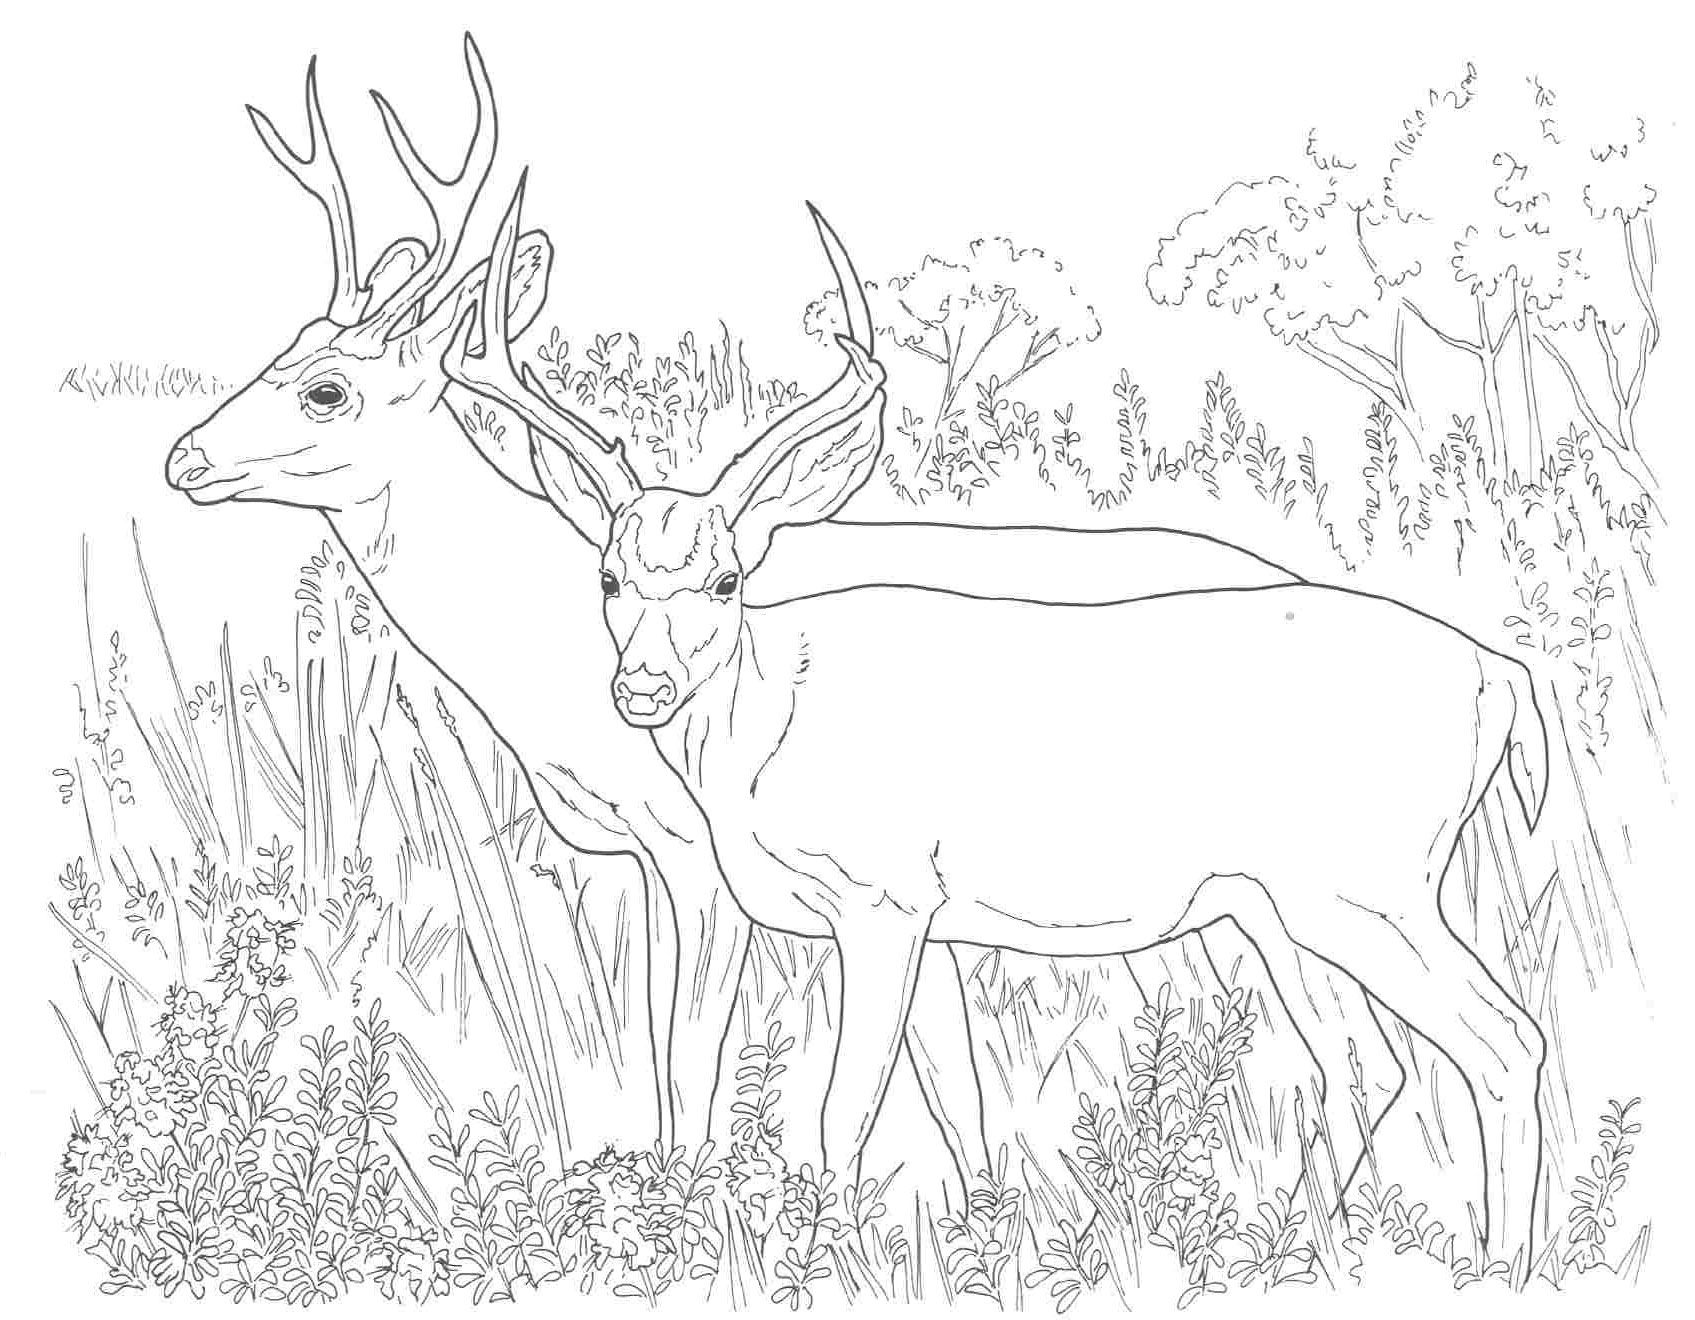 ▷ Deer: Coloring Pages & Books - 100% FREE and printable!